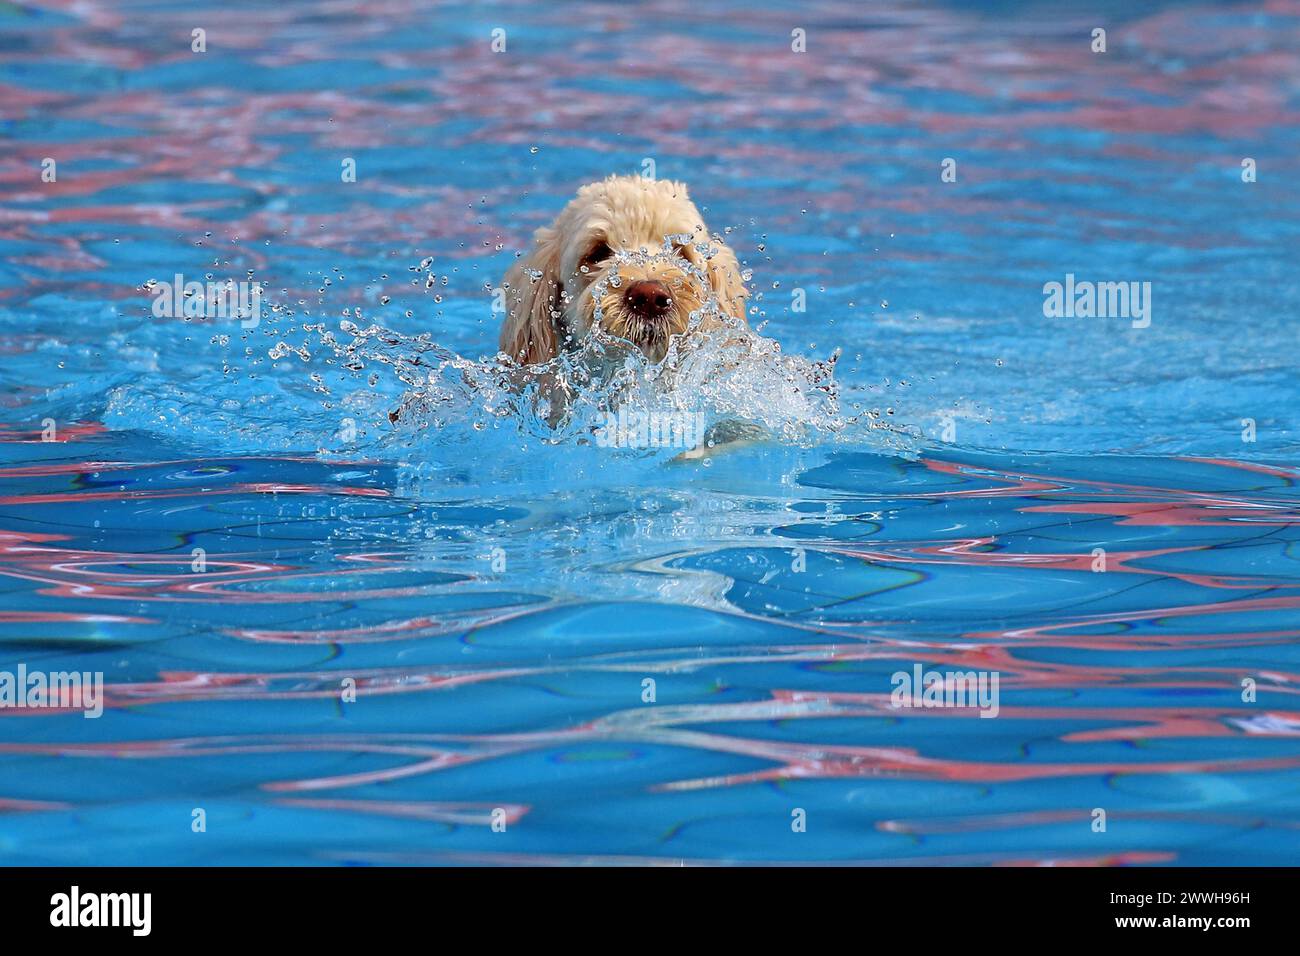 Dog in the water, swimming pool Stock Photo